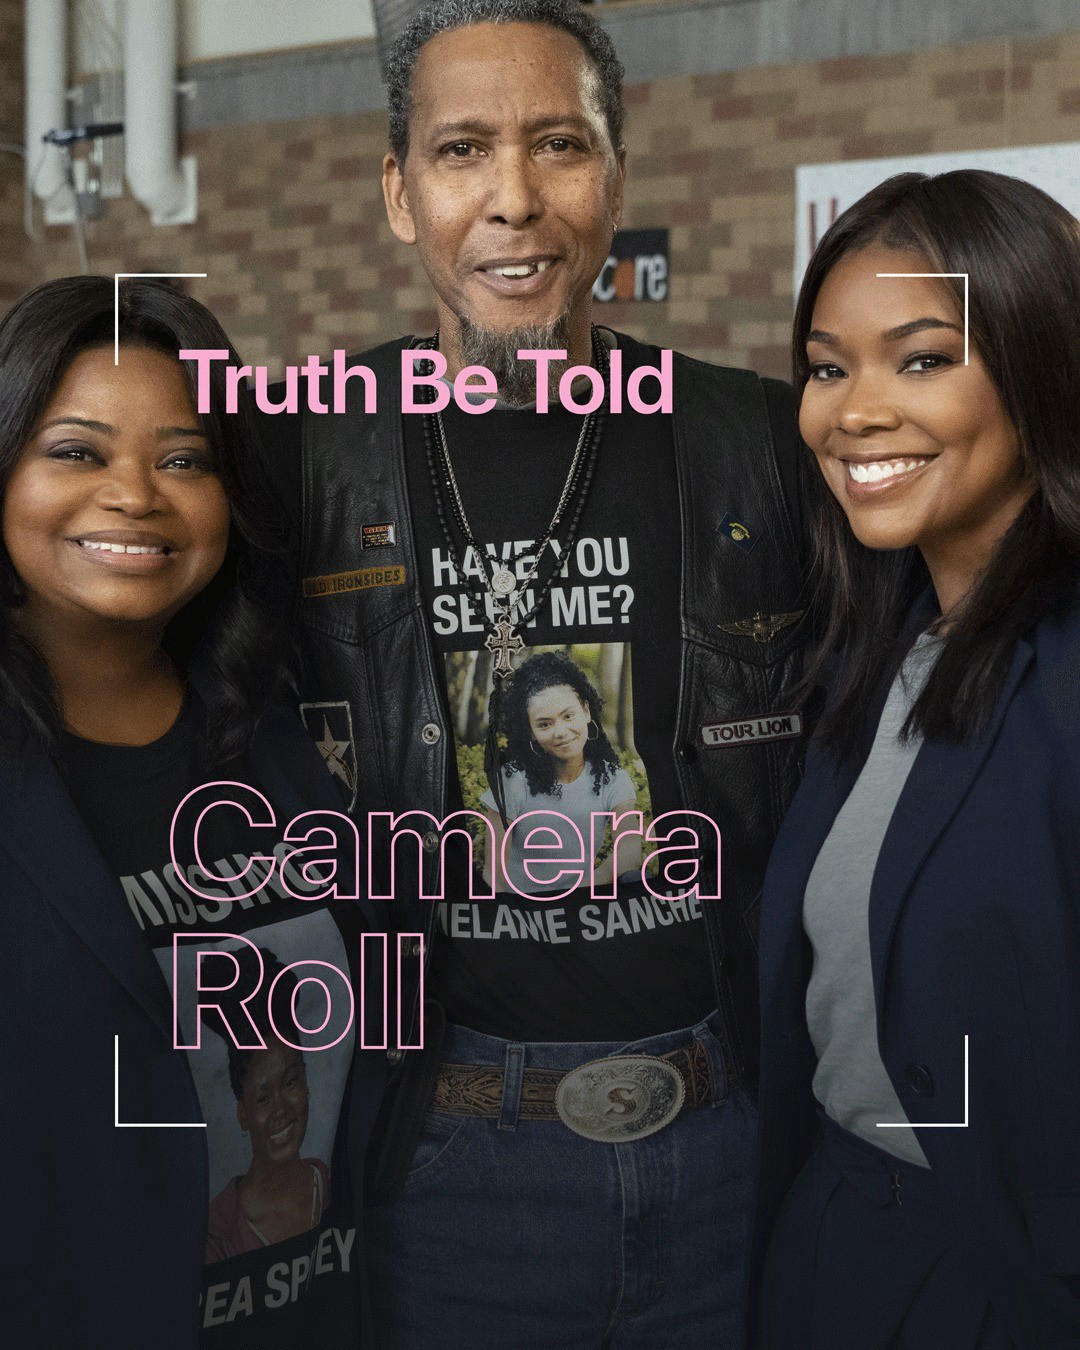 The cast and crew of #TruthBeTold are just like family, with some friendships going back decades bef